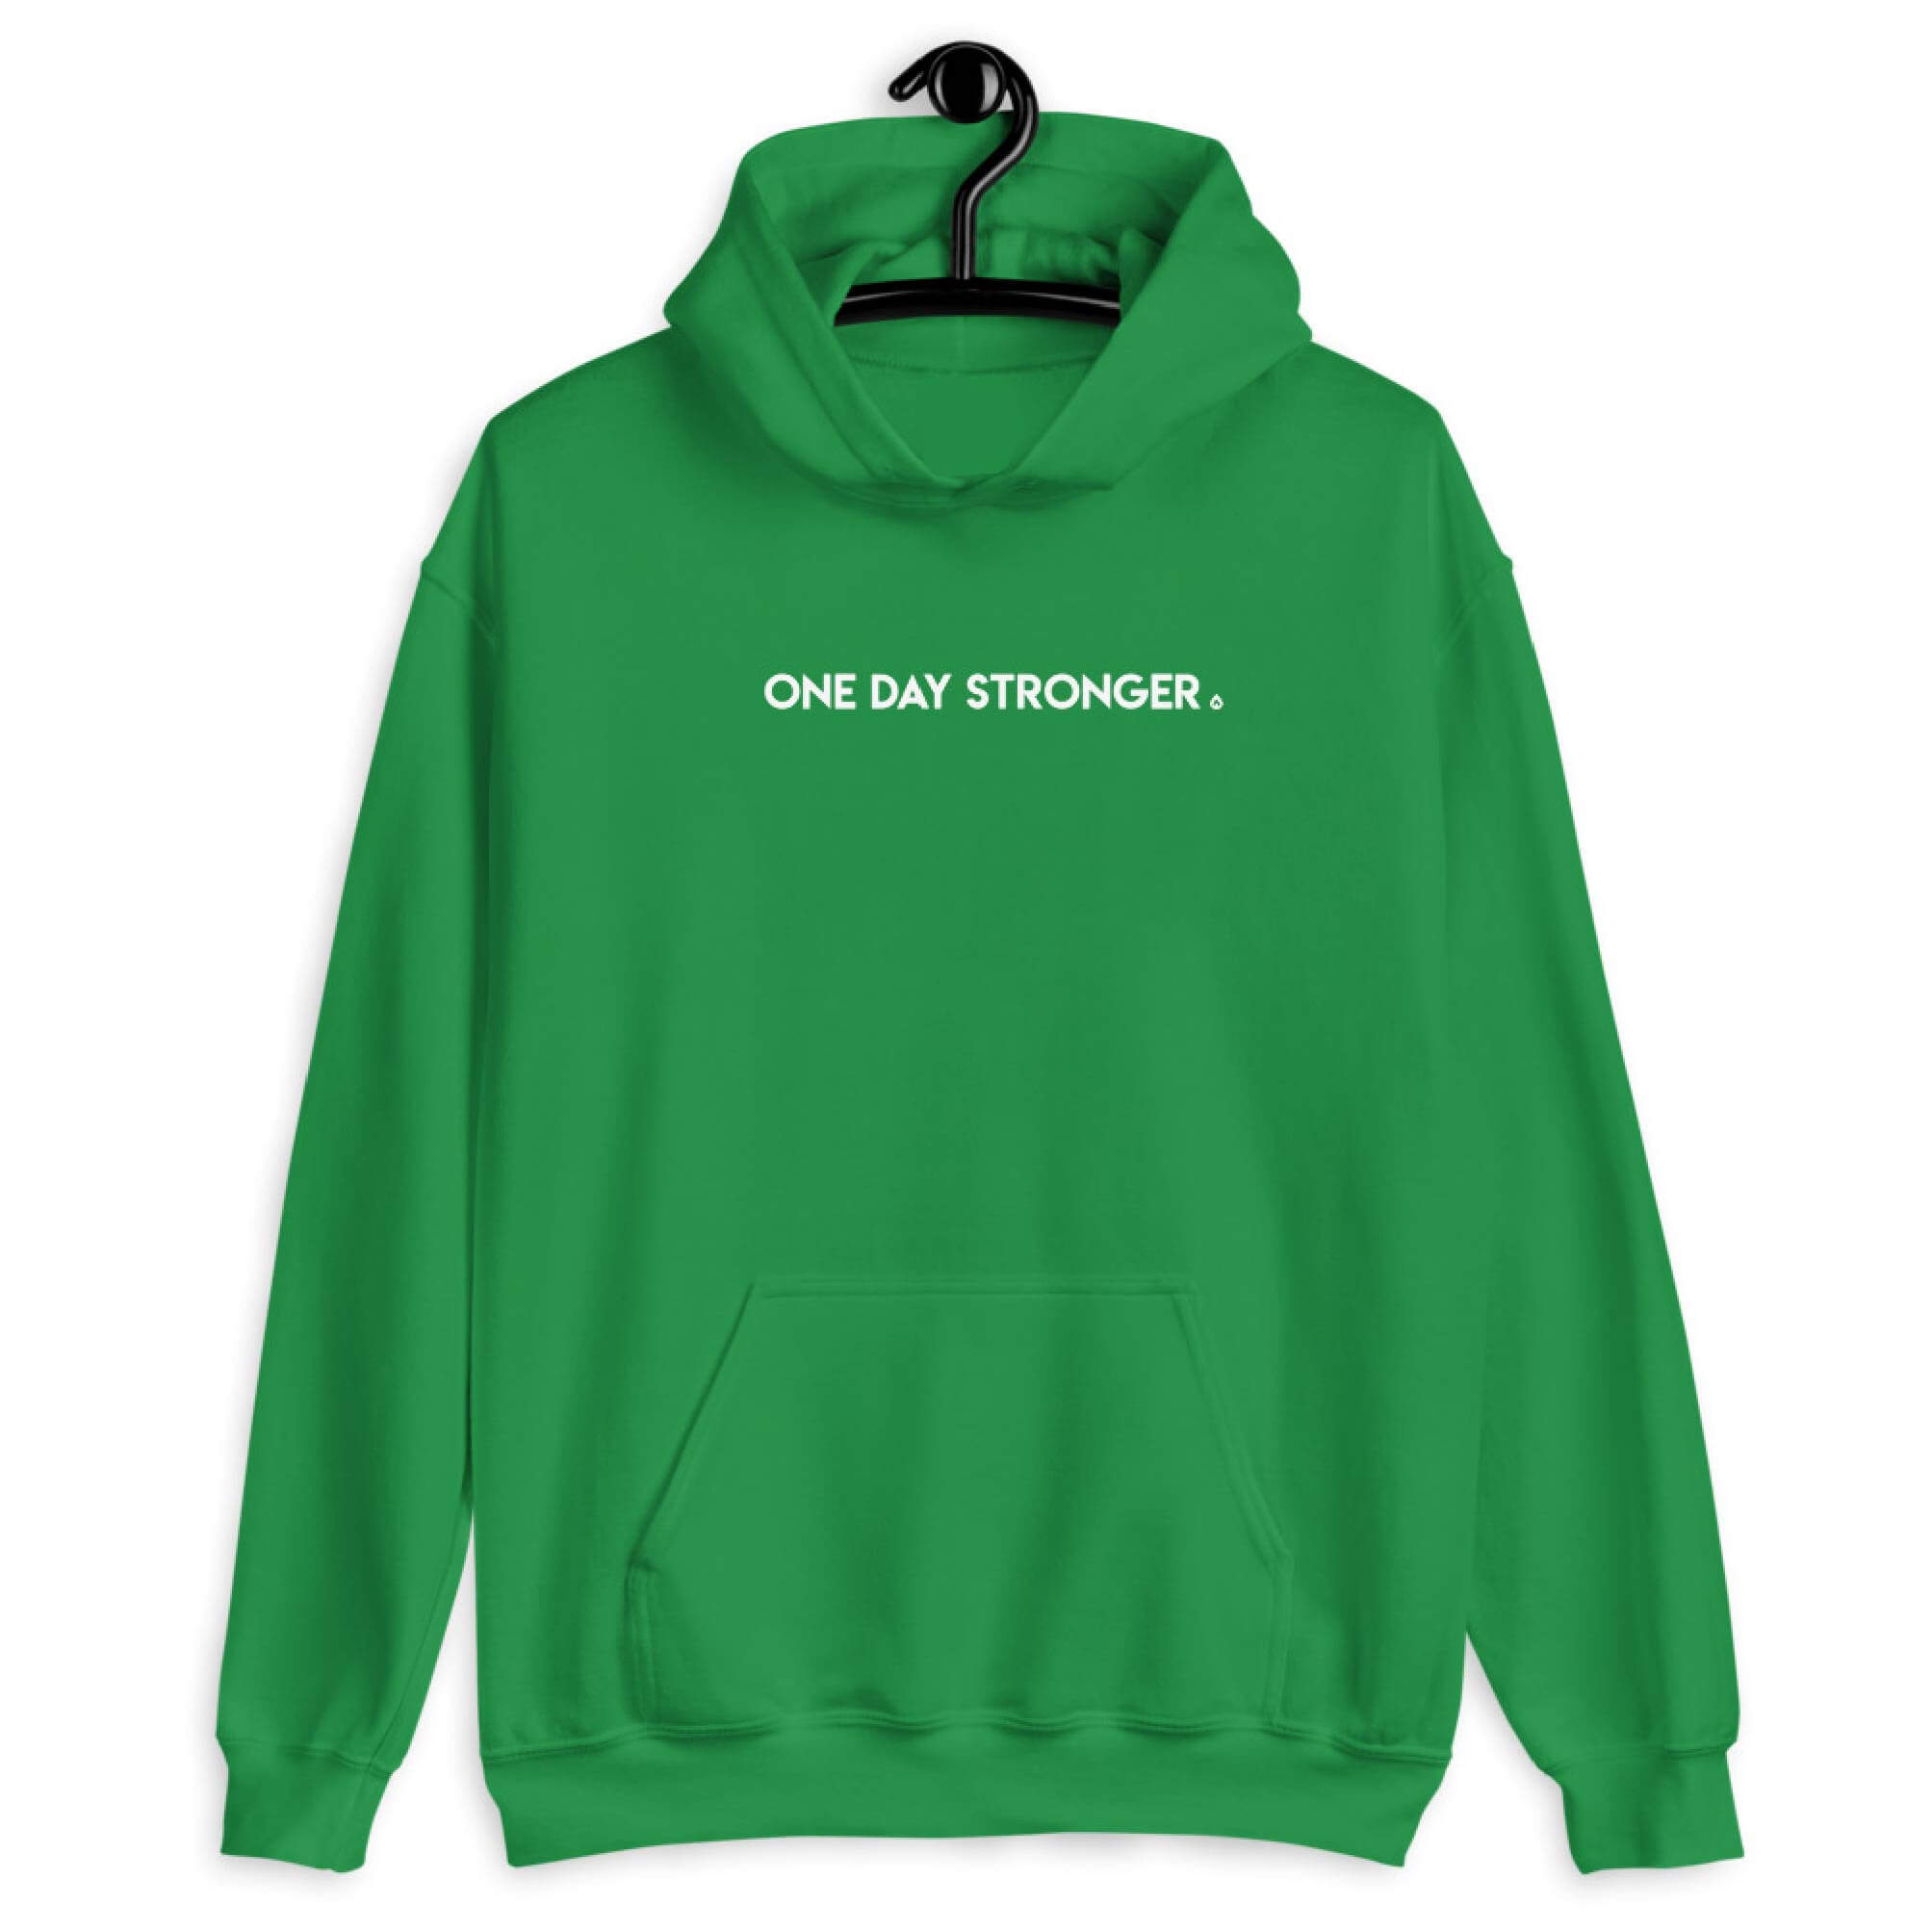 One Day Stronger Women's Hoodie